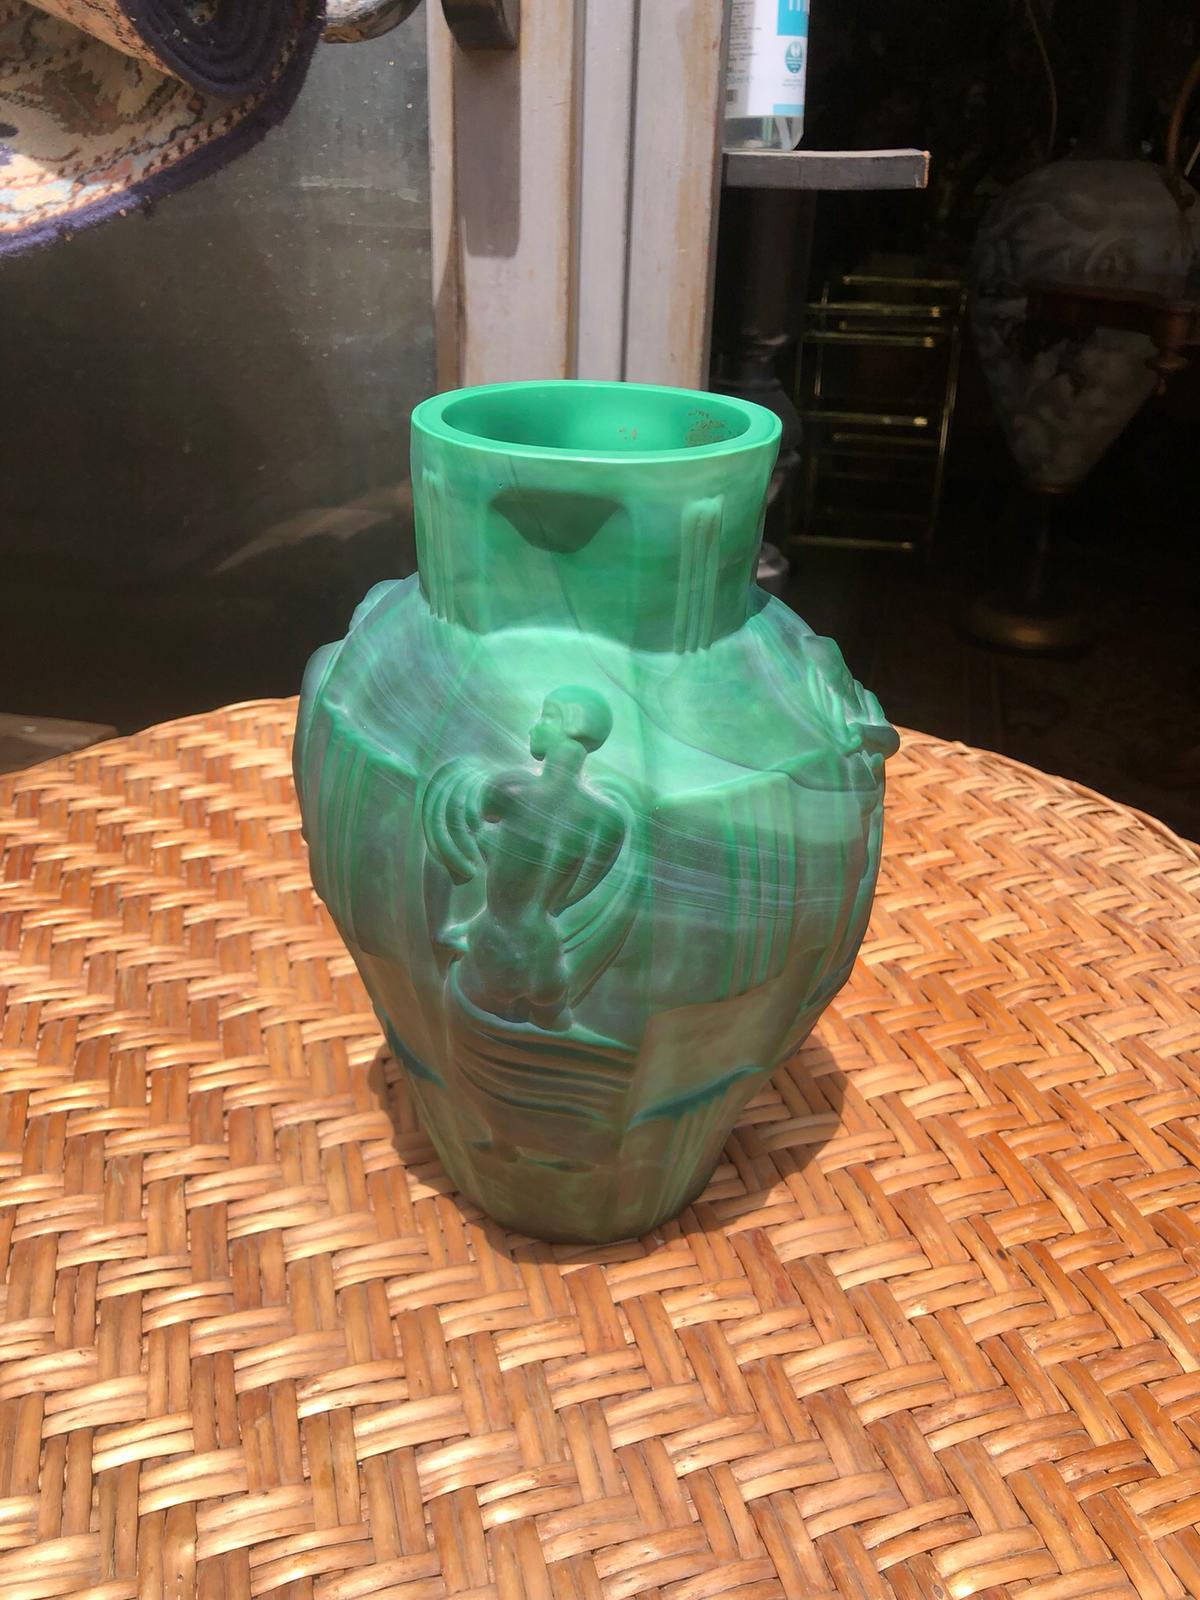 A beautiful Art Deco vase in green malachite glass by Artur Pleva for Desna Ortel, with female figures in relief. Made in Czechoslovakia, this type of vase is widely renowned in the world of glass collectors as a guarantee of high quality and